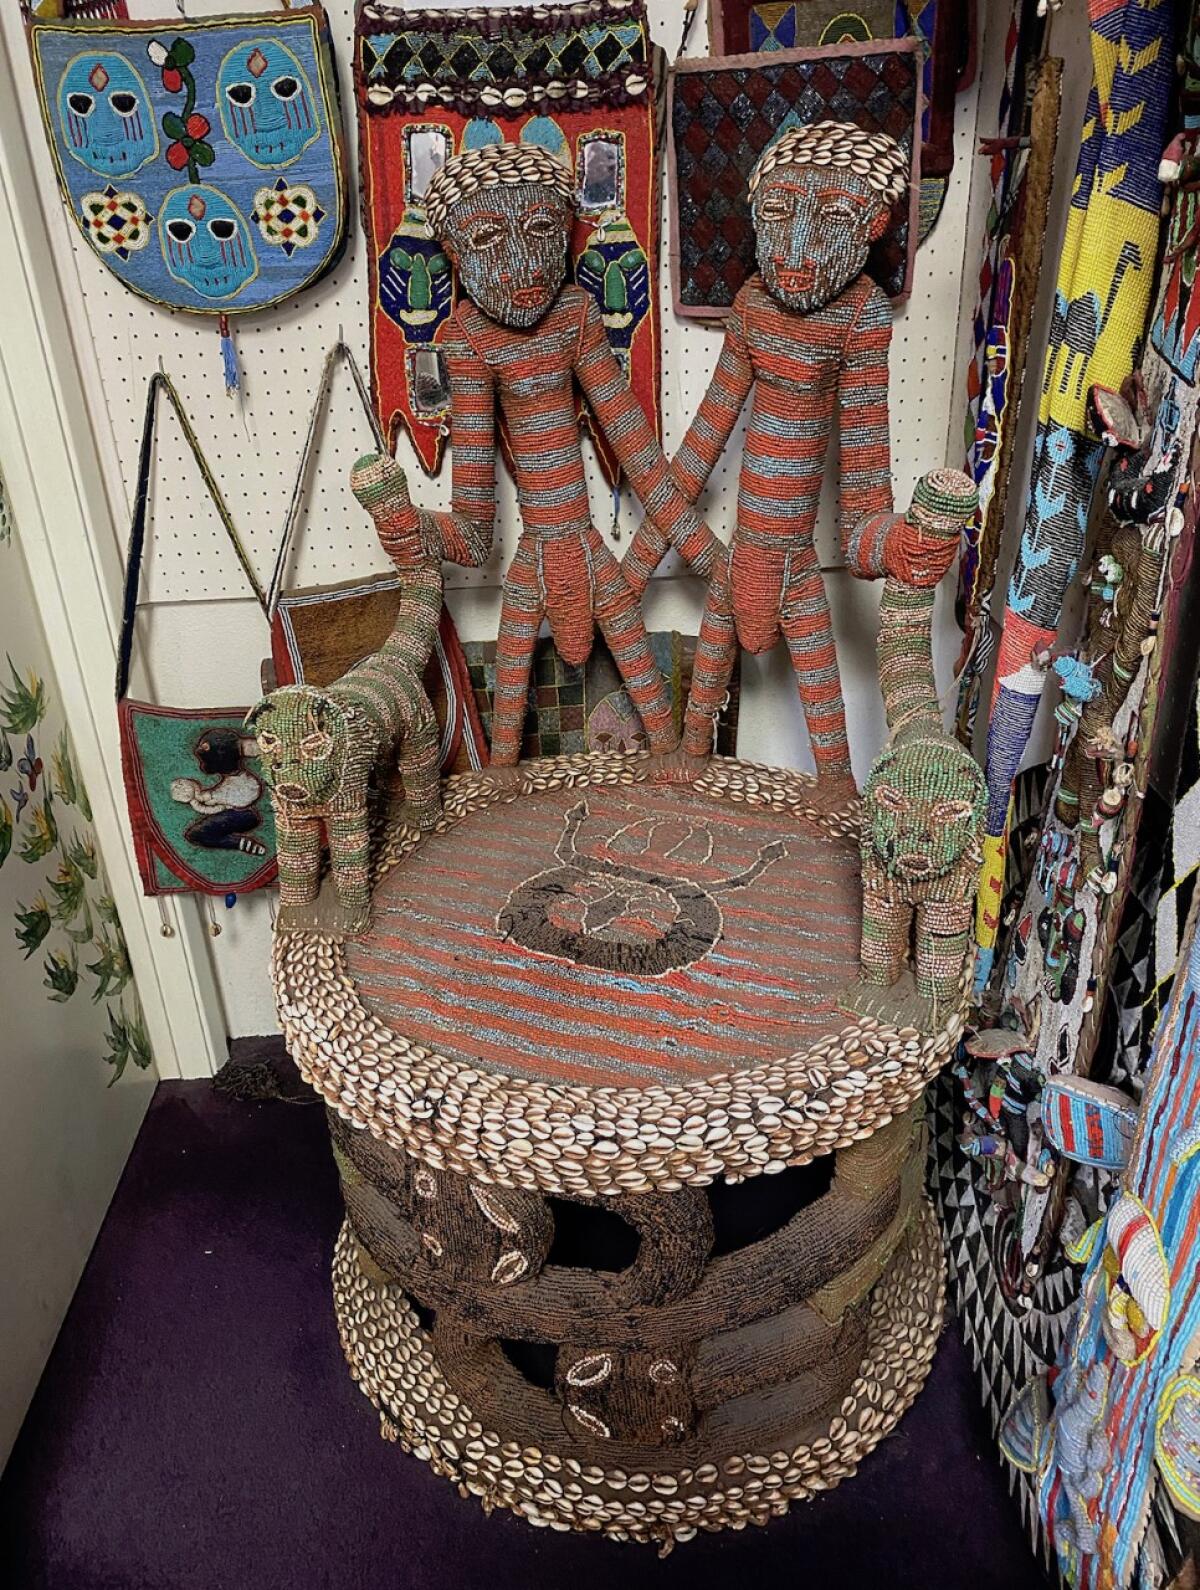 An African King’s Chair, from the Yoruba tribe of Nigeria, now sitting outside the museum in the back of the store.